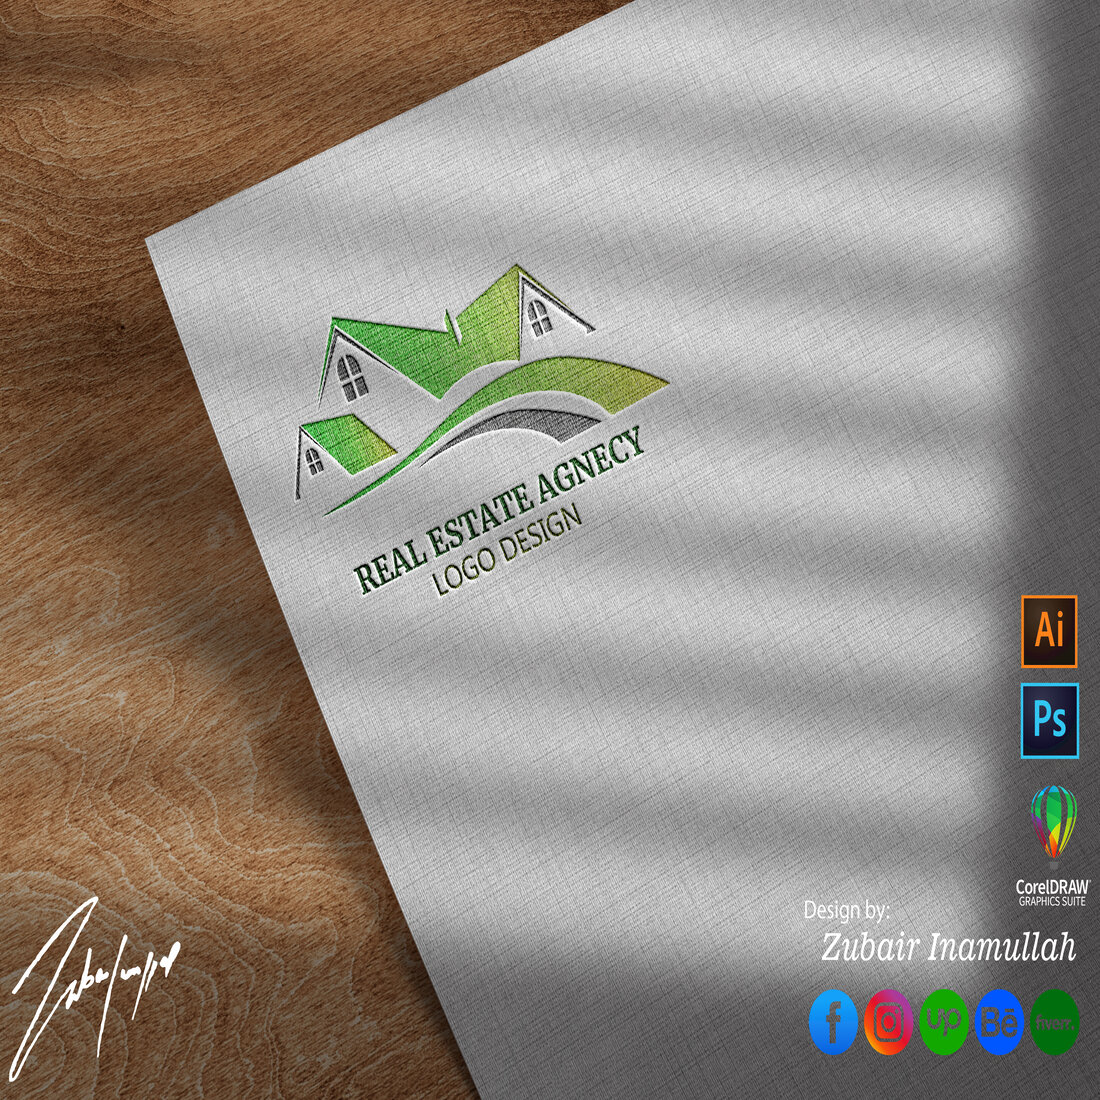 Real Estate Agency Logo with Adobe Illustrator Source File, JPGE PNG preview image.